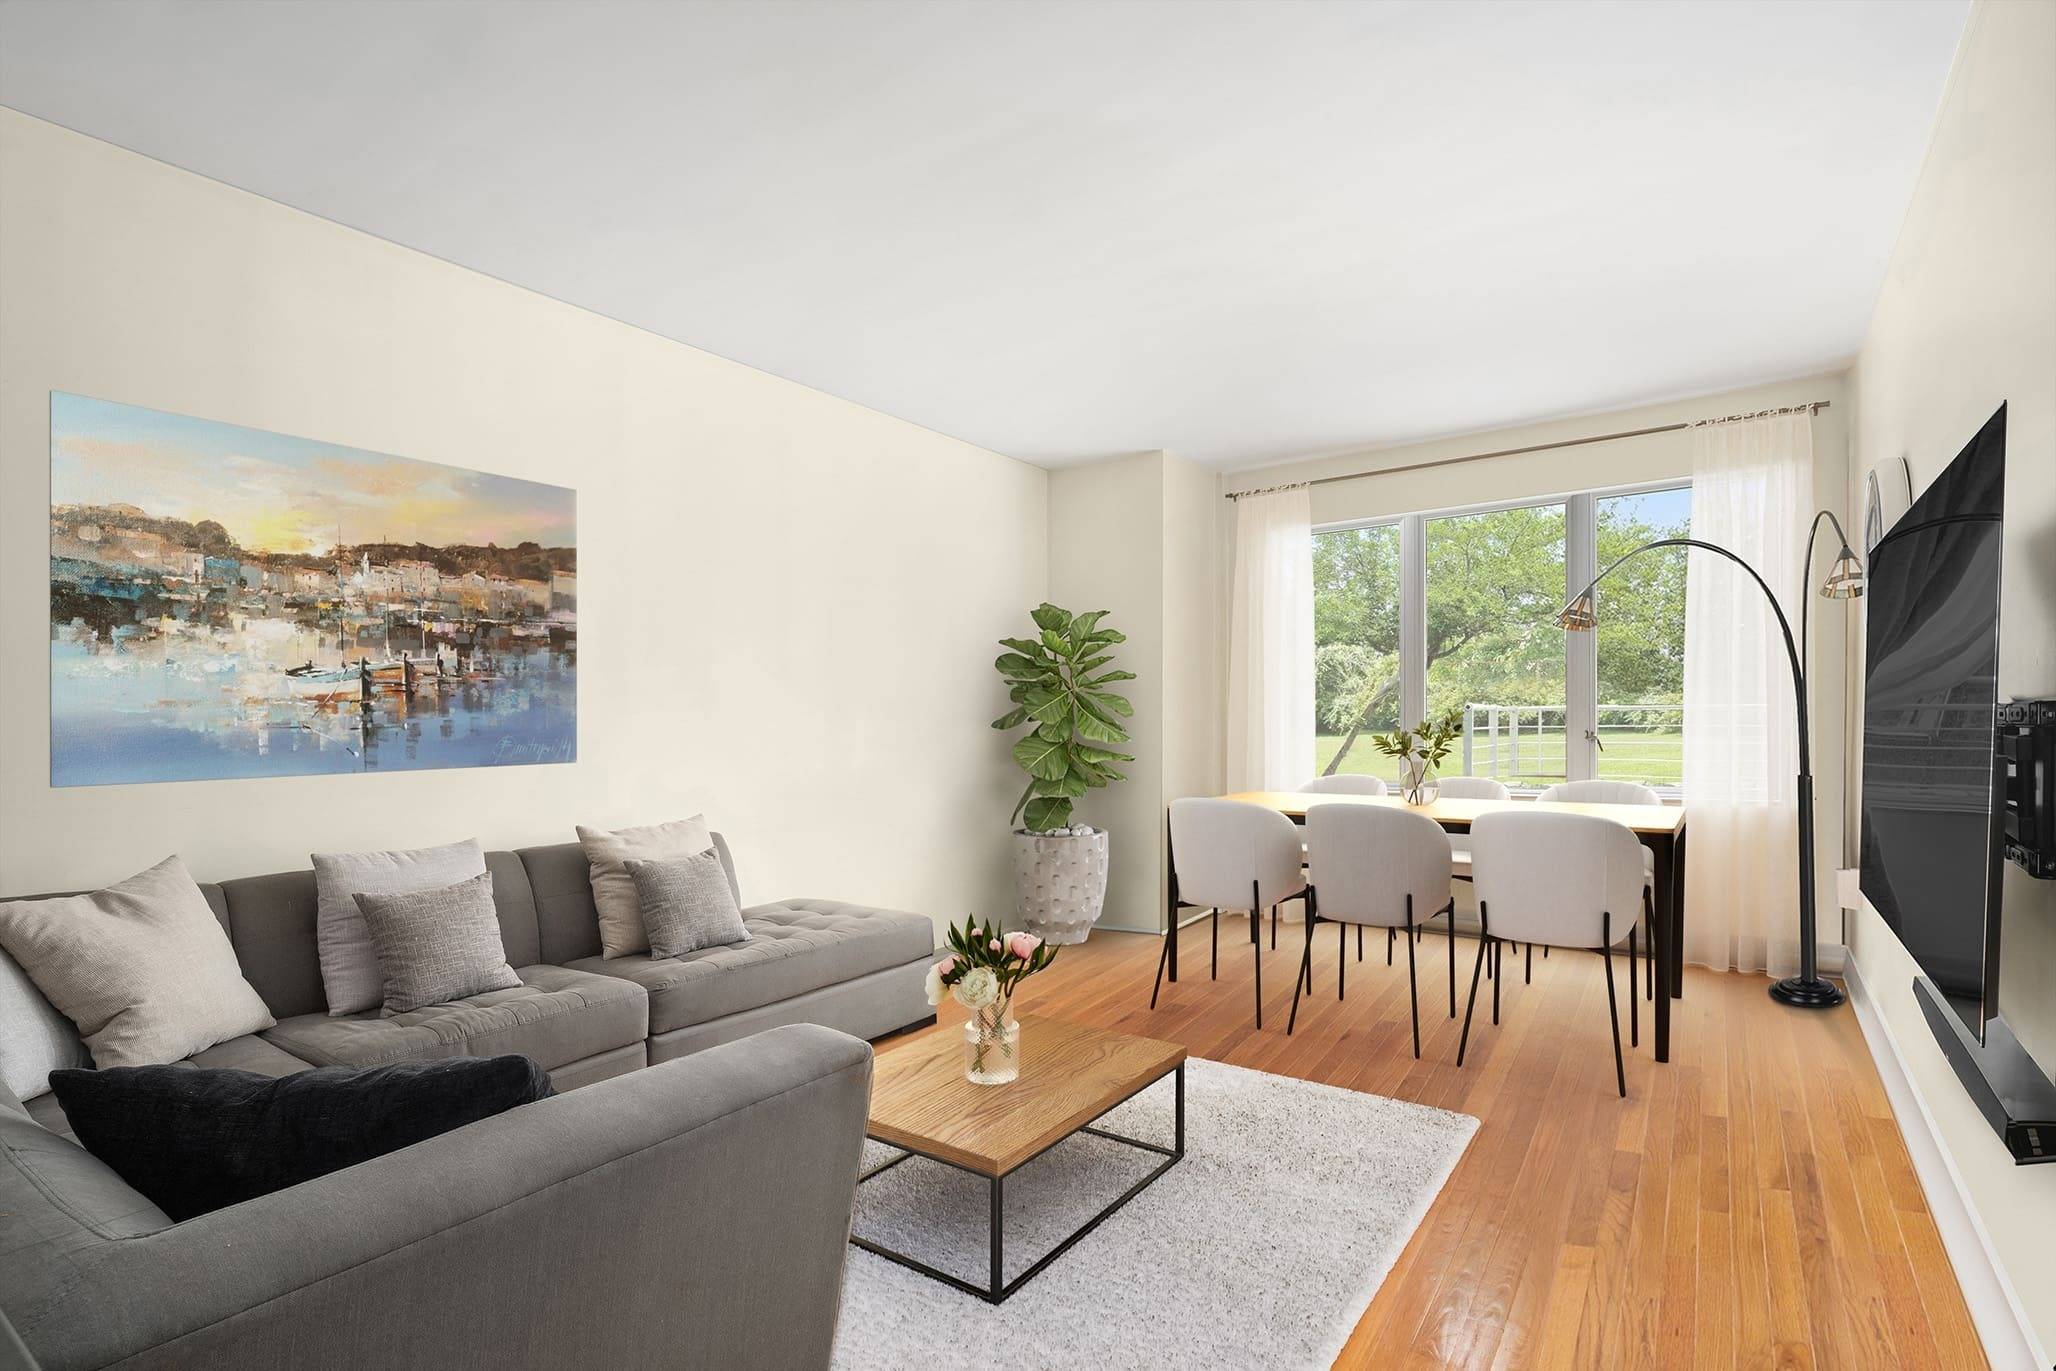 Prime Williamsburg Duplex Apartment Overlooking McCarren Park Nestled in the heart of Williamsburg, this remarkable 3 bedroom duplex offers a rare opportunity to own a piece of coveted Brooklyn living ...